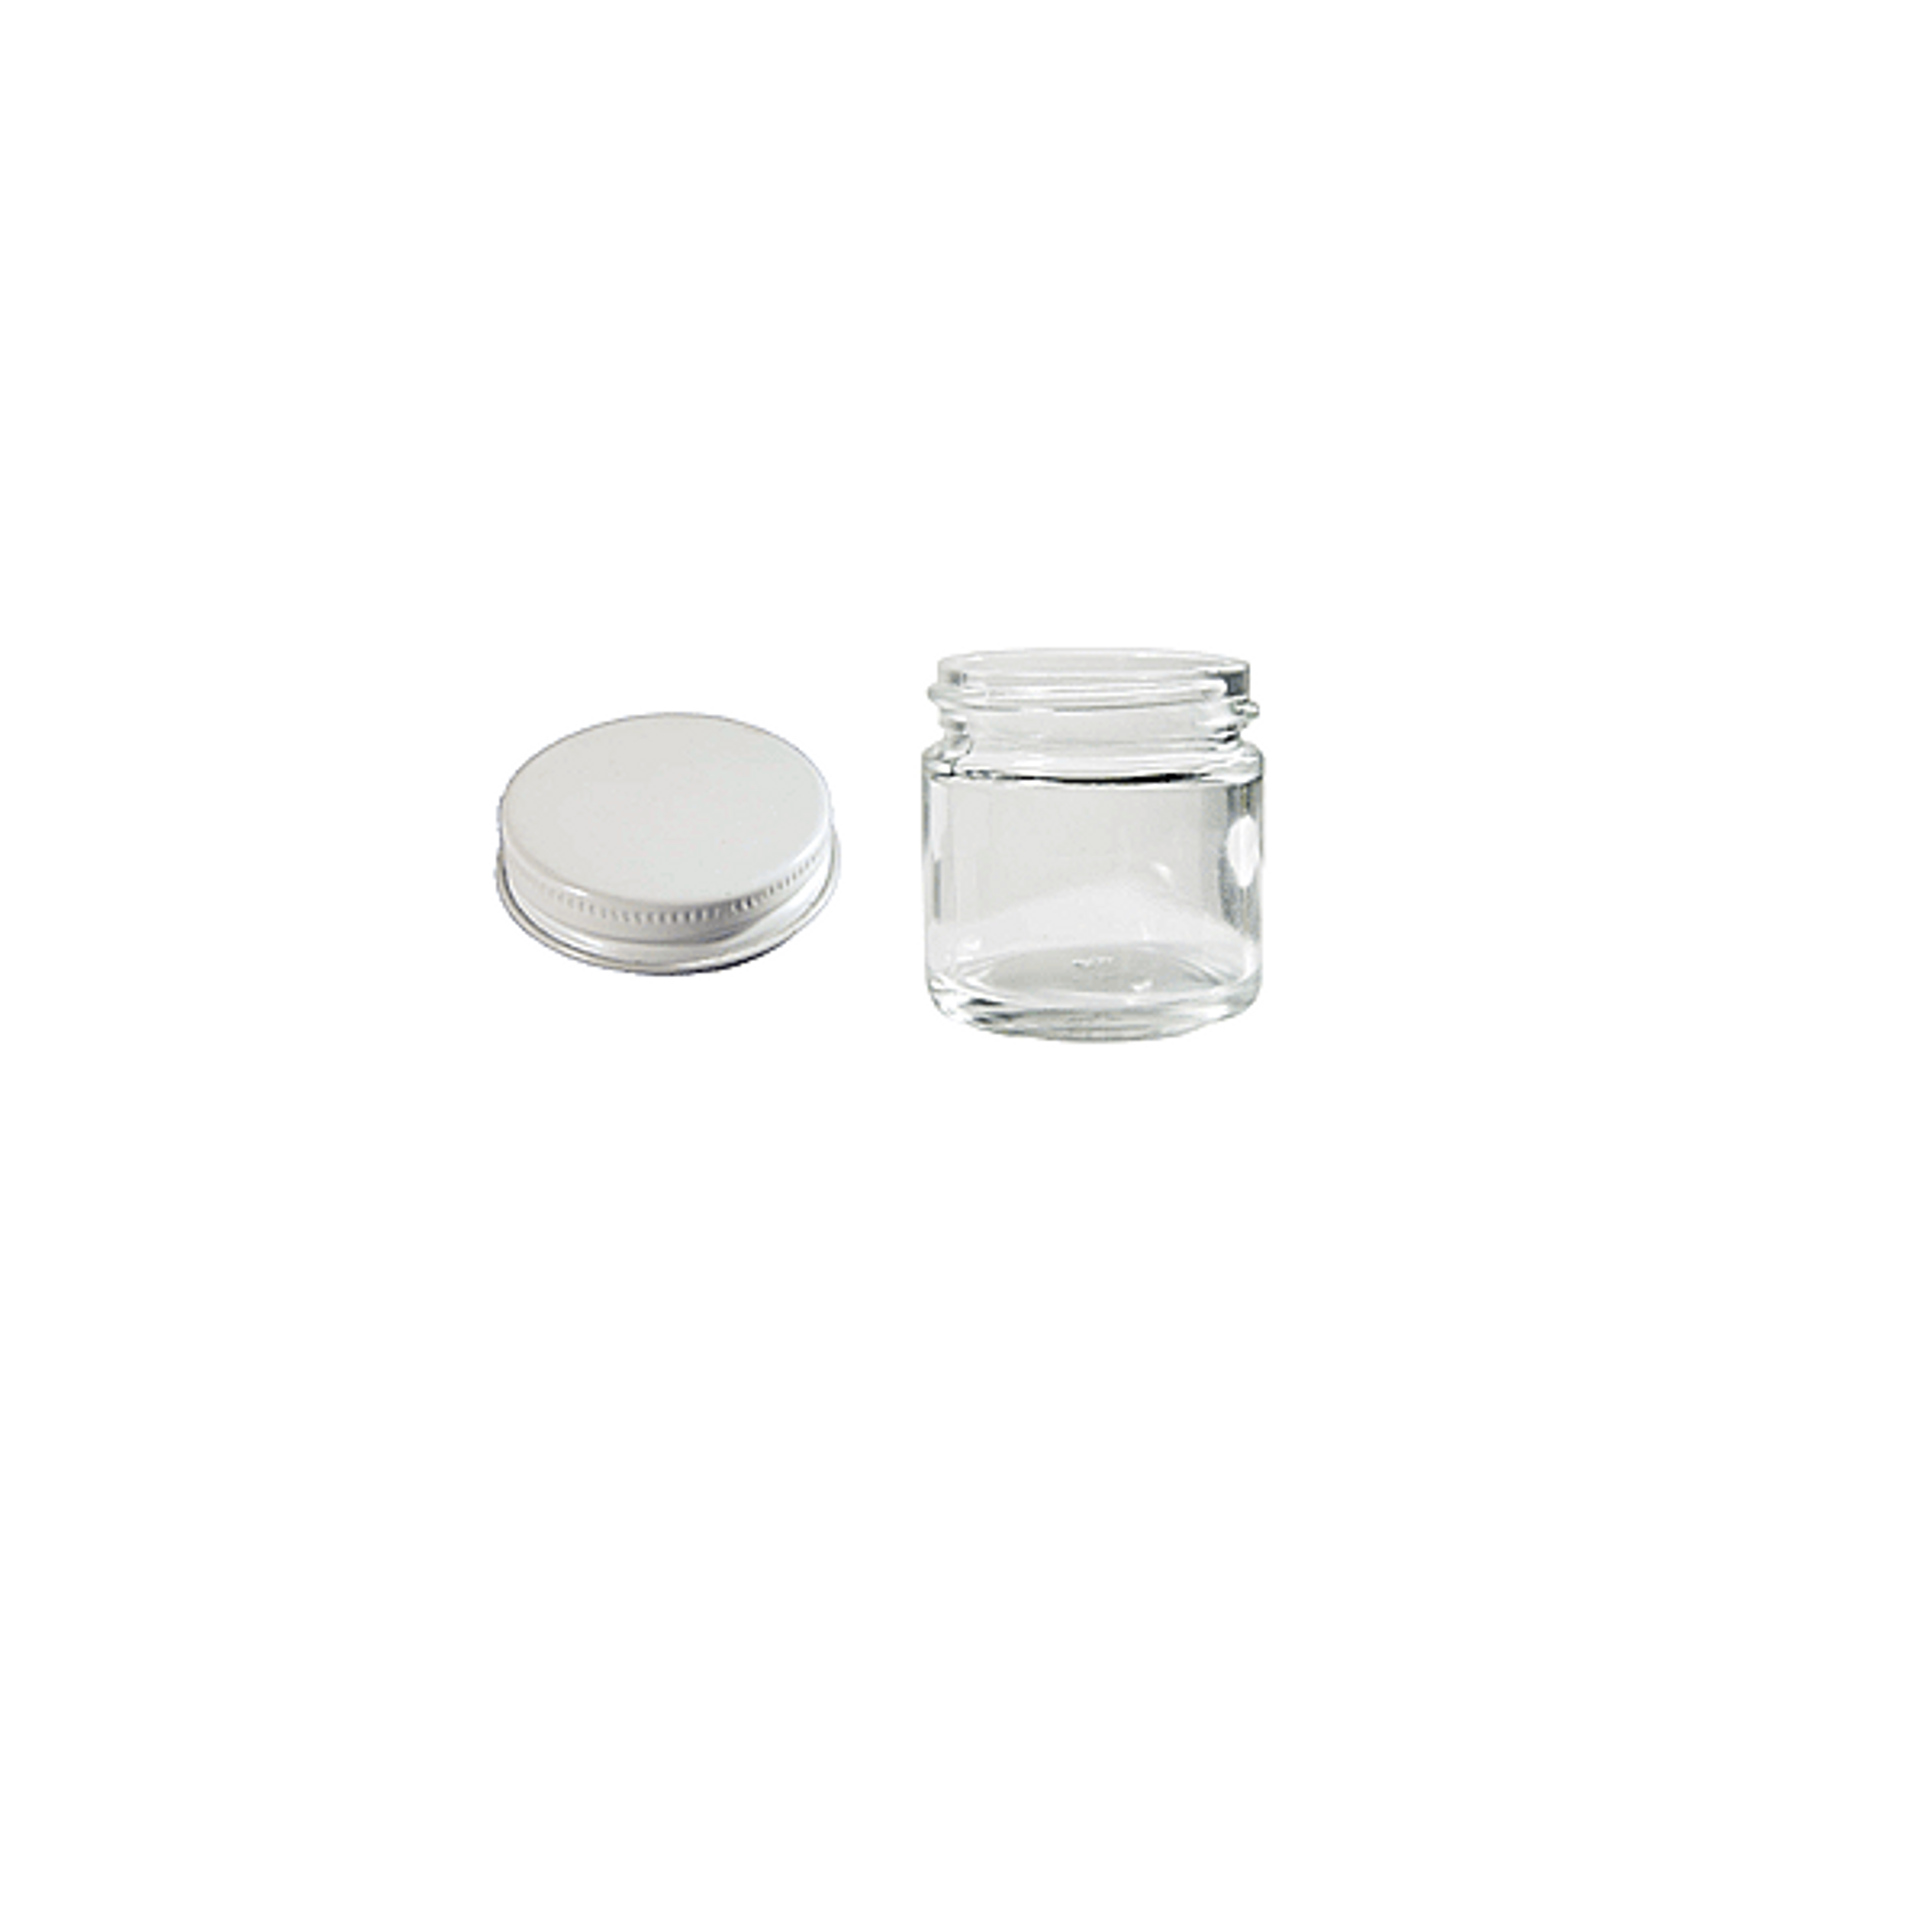 6 oz Clear Glass Jars (Bulk), Caps NOT Included